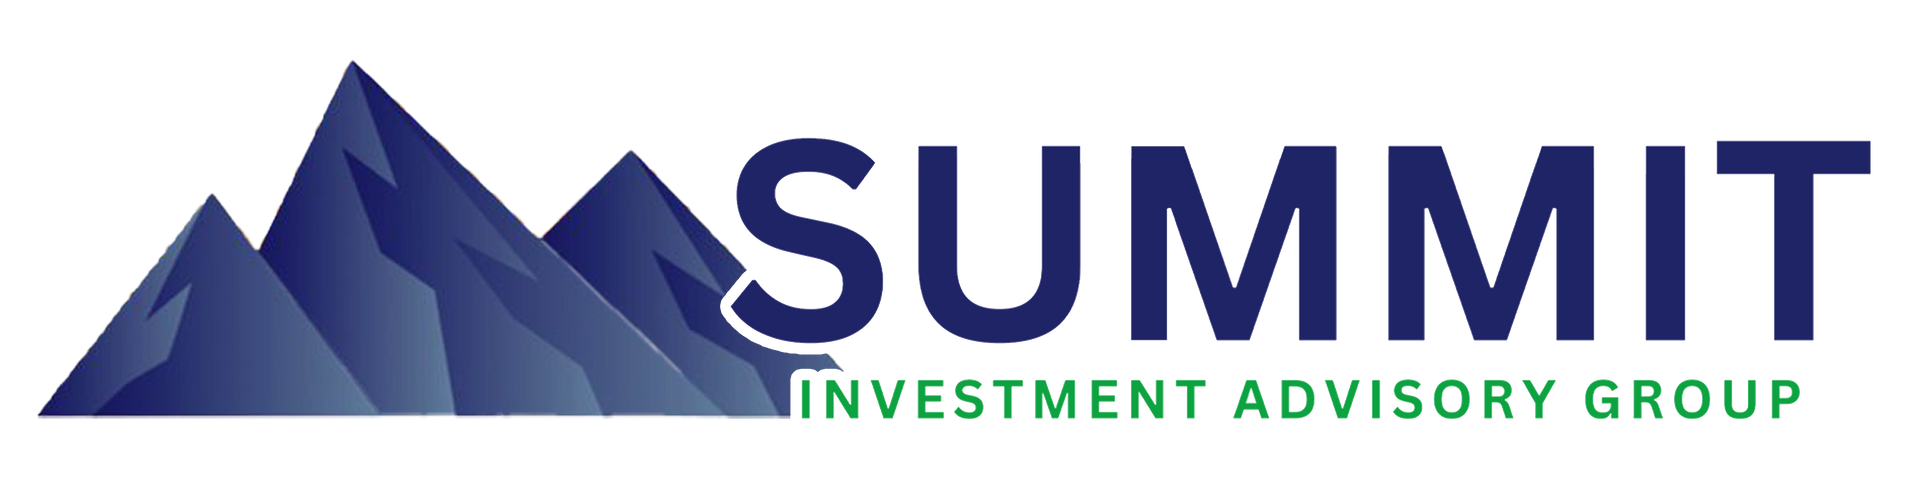 A logo for the summit investment advisory group